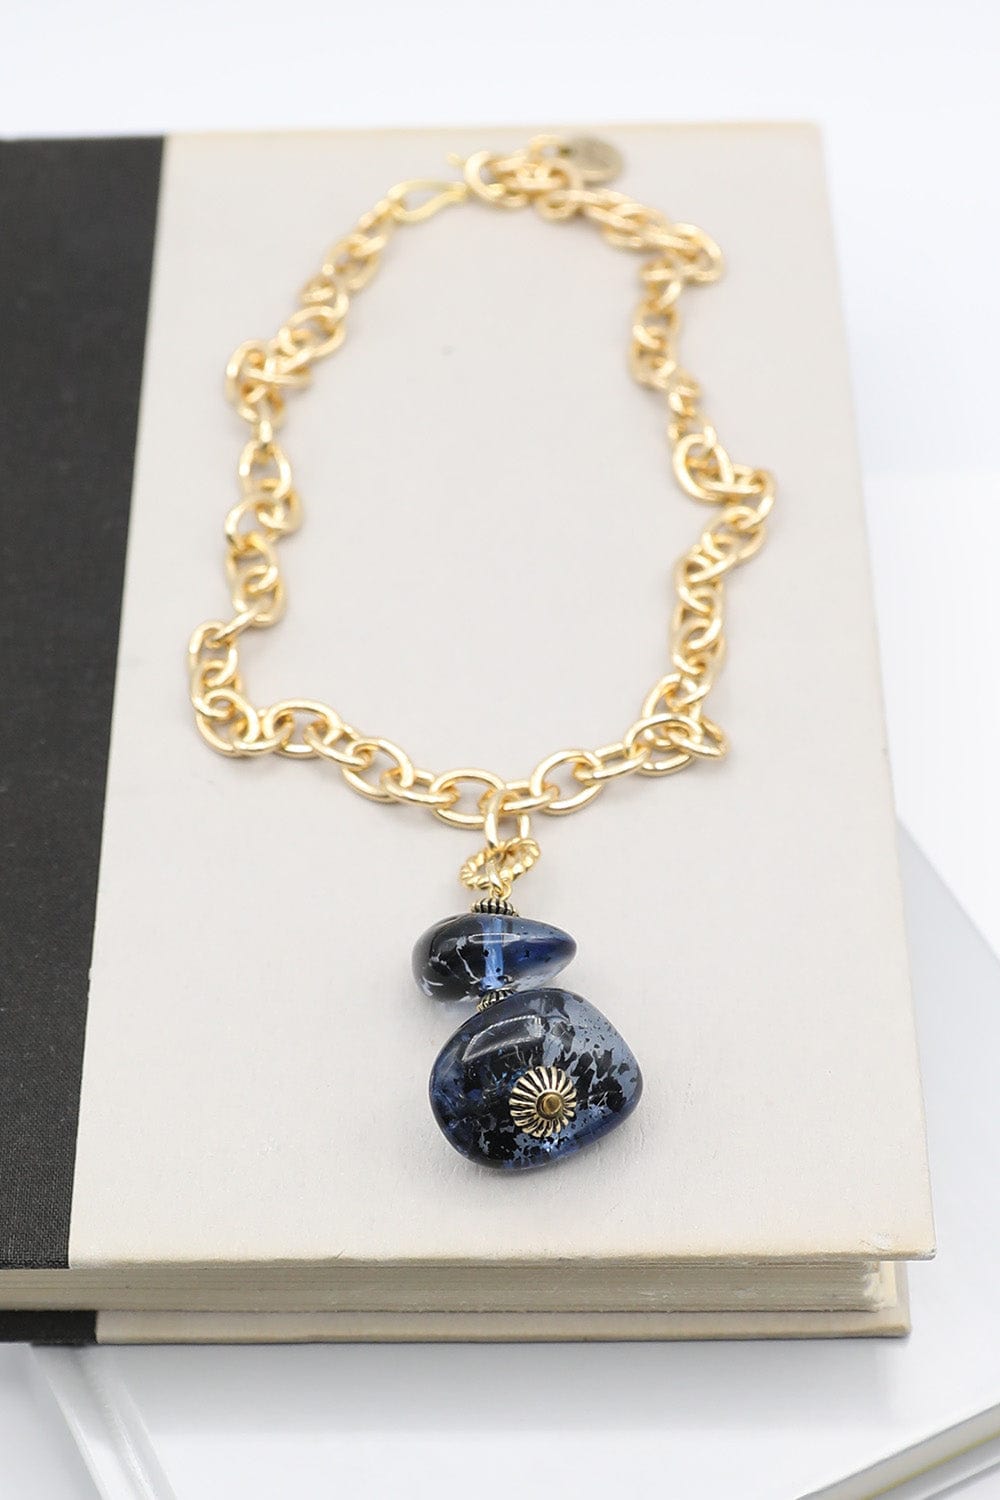 Necklace with Two Ocean Blue Resin Beads on Gold Chain